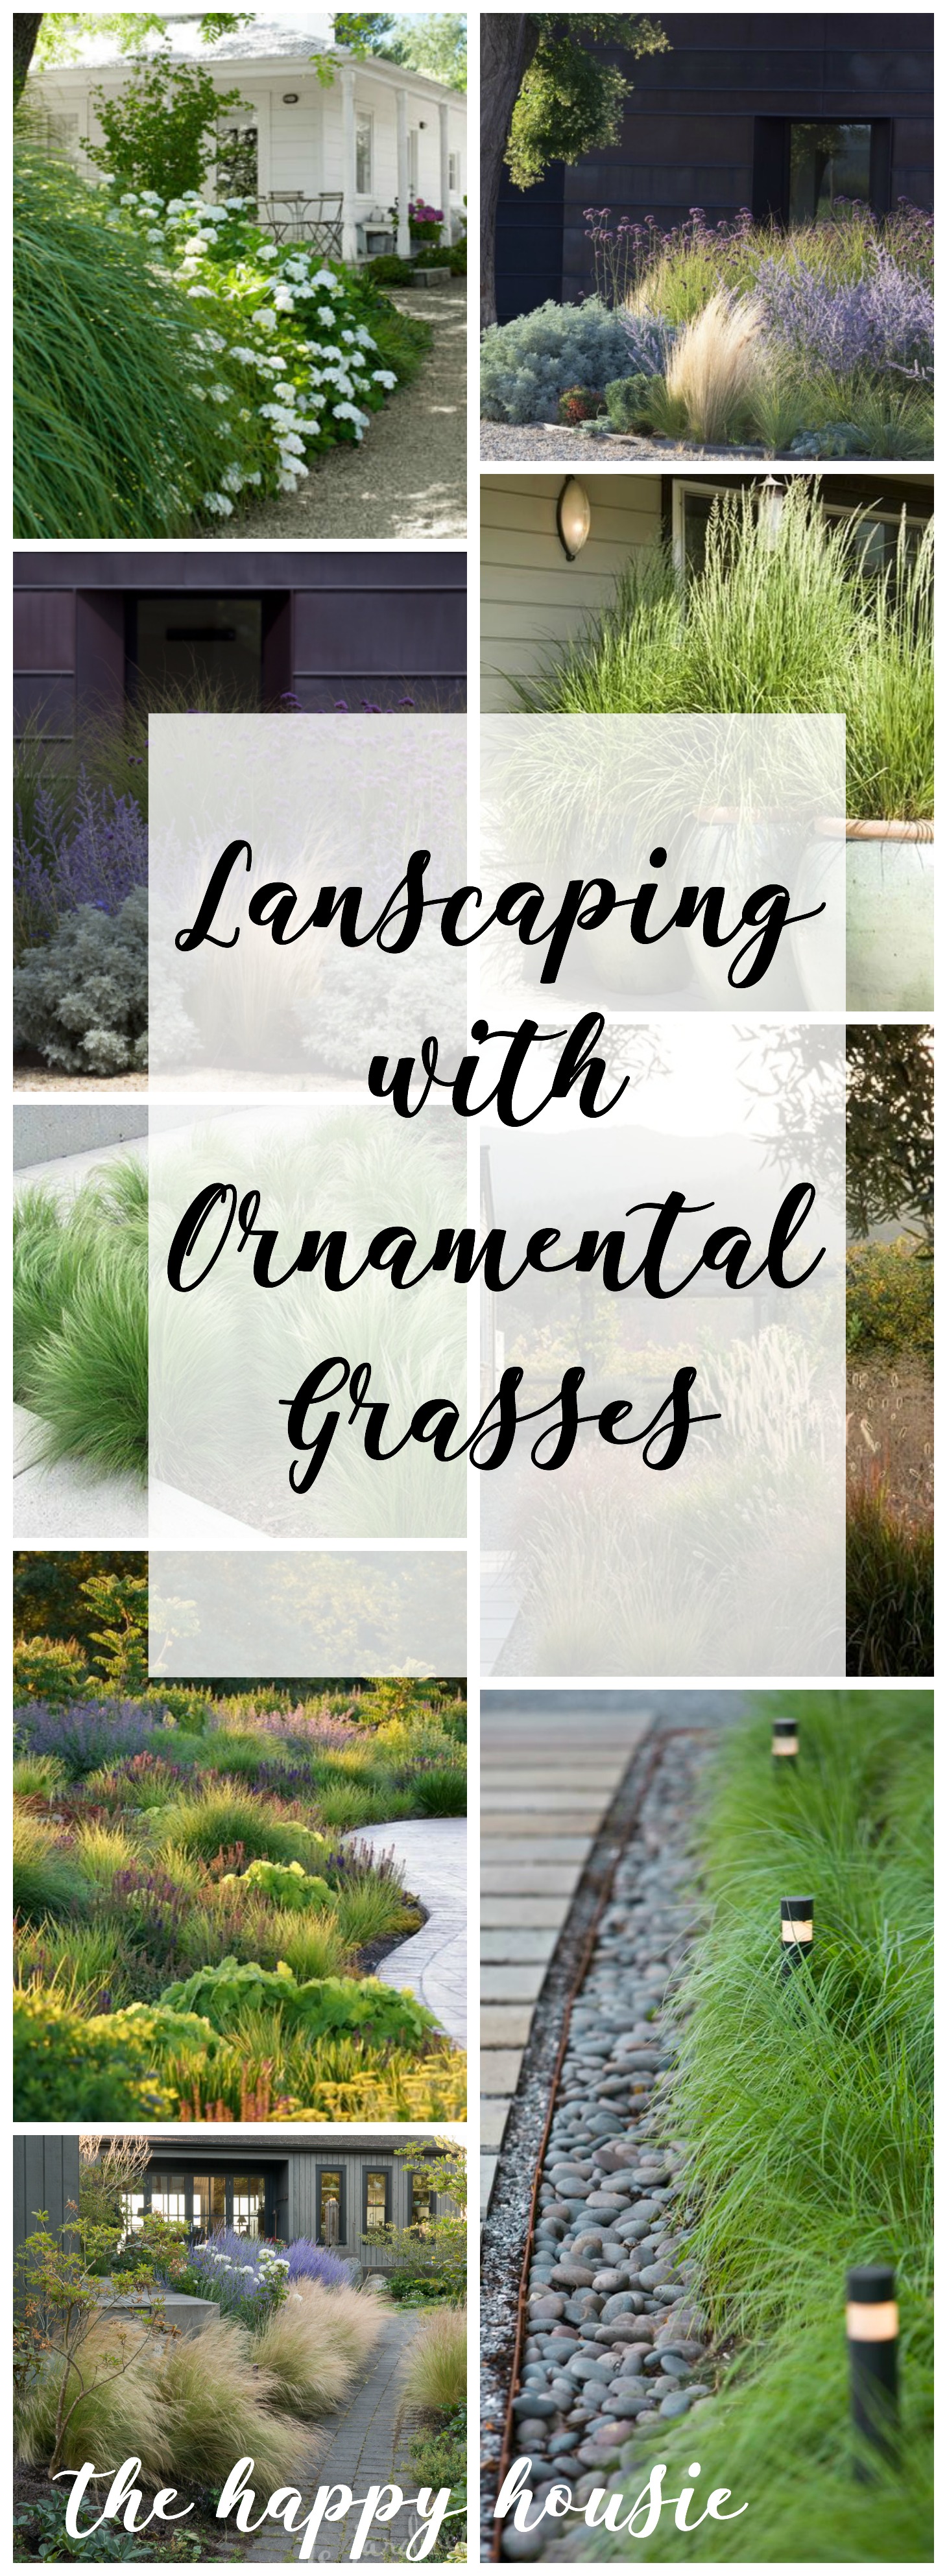 Landscaping with ornamental grasses graphic.